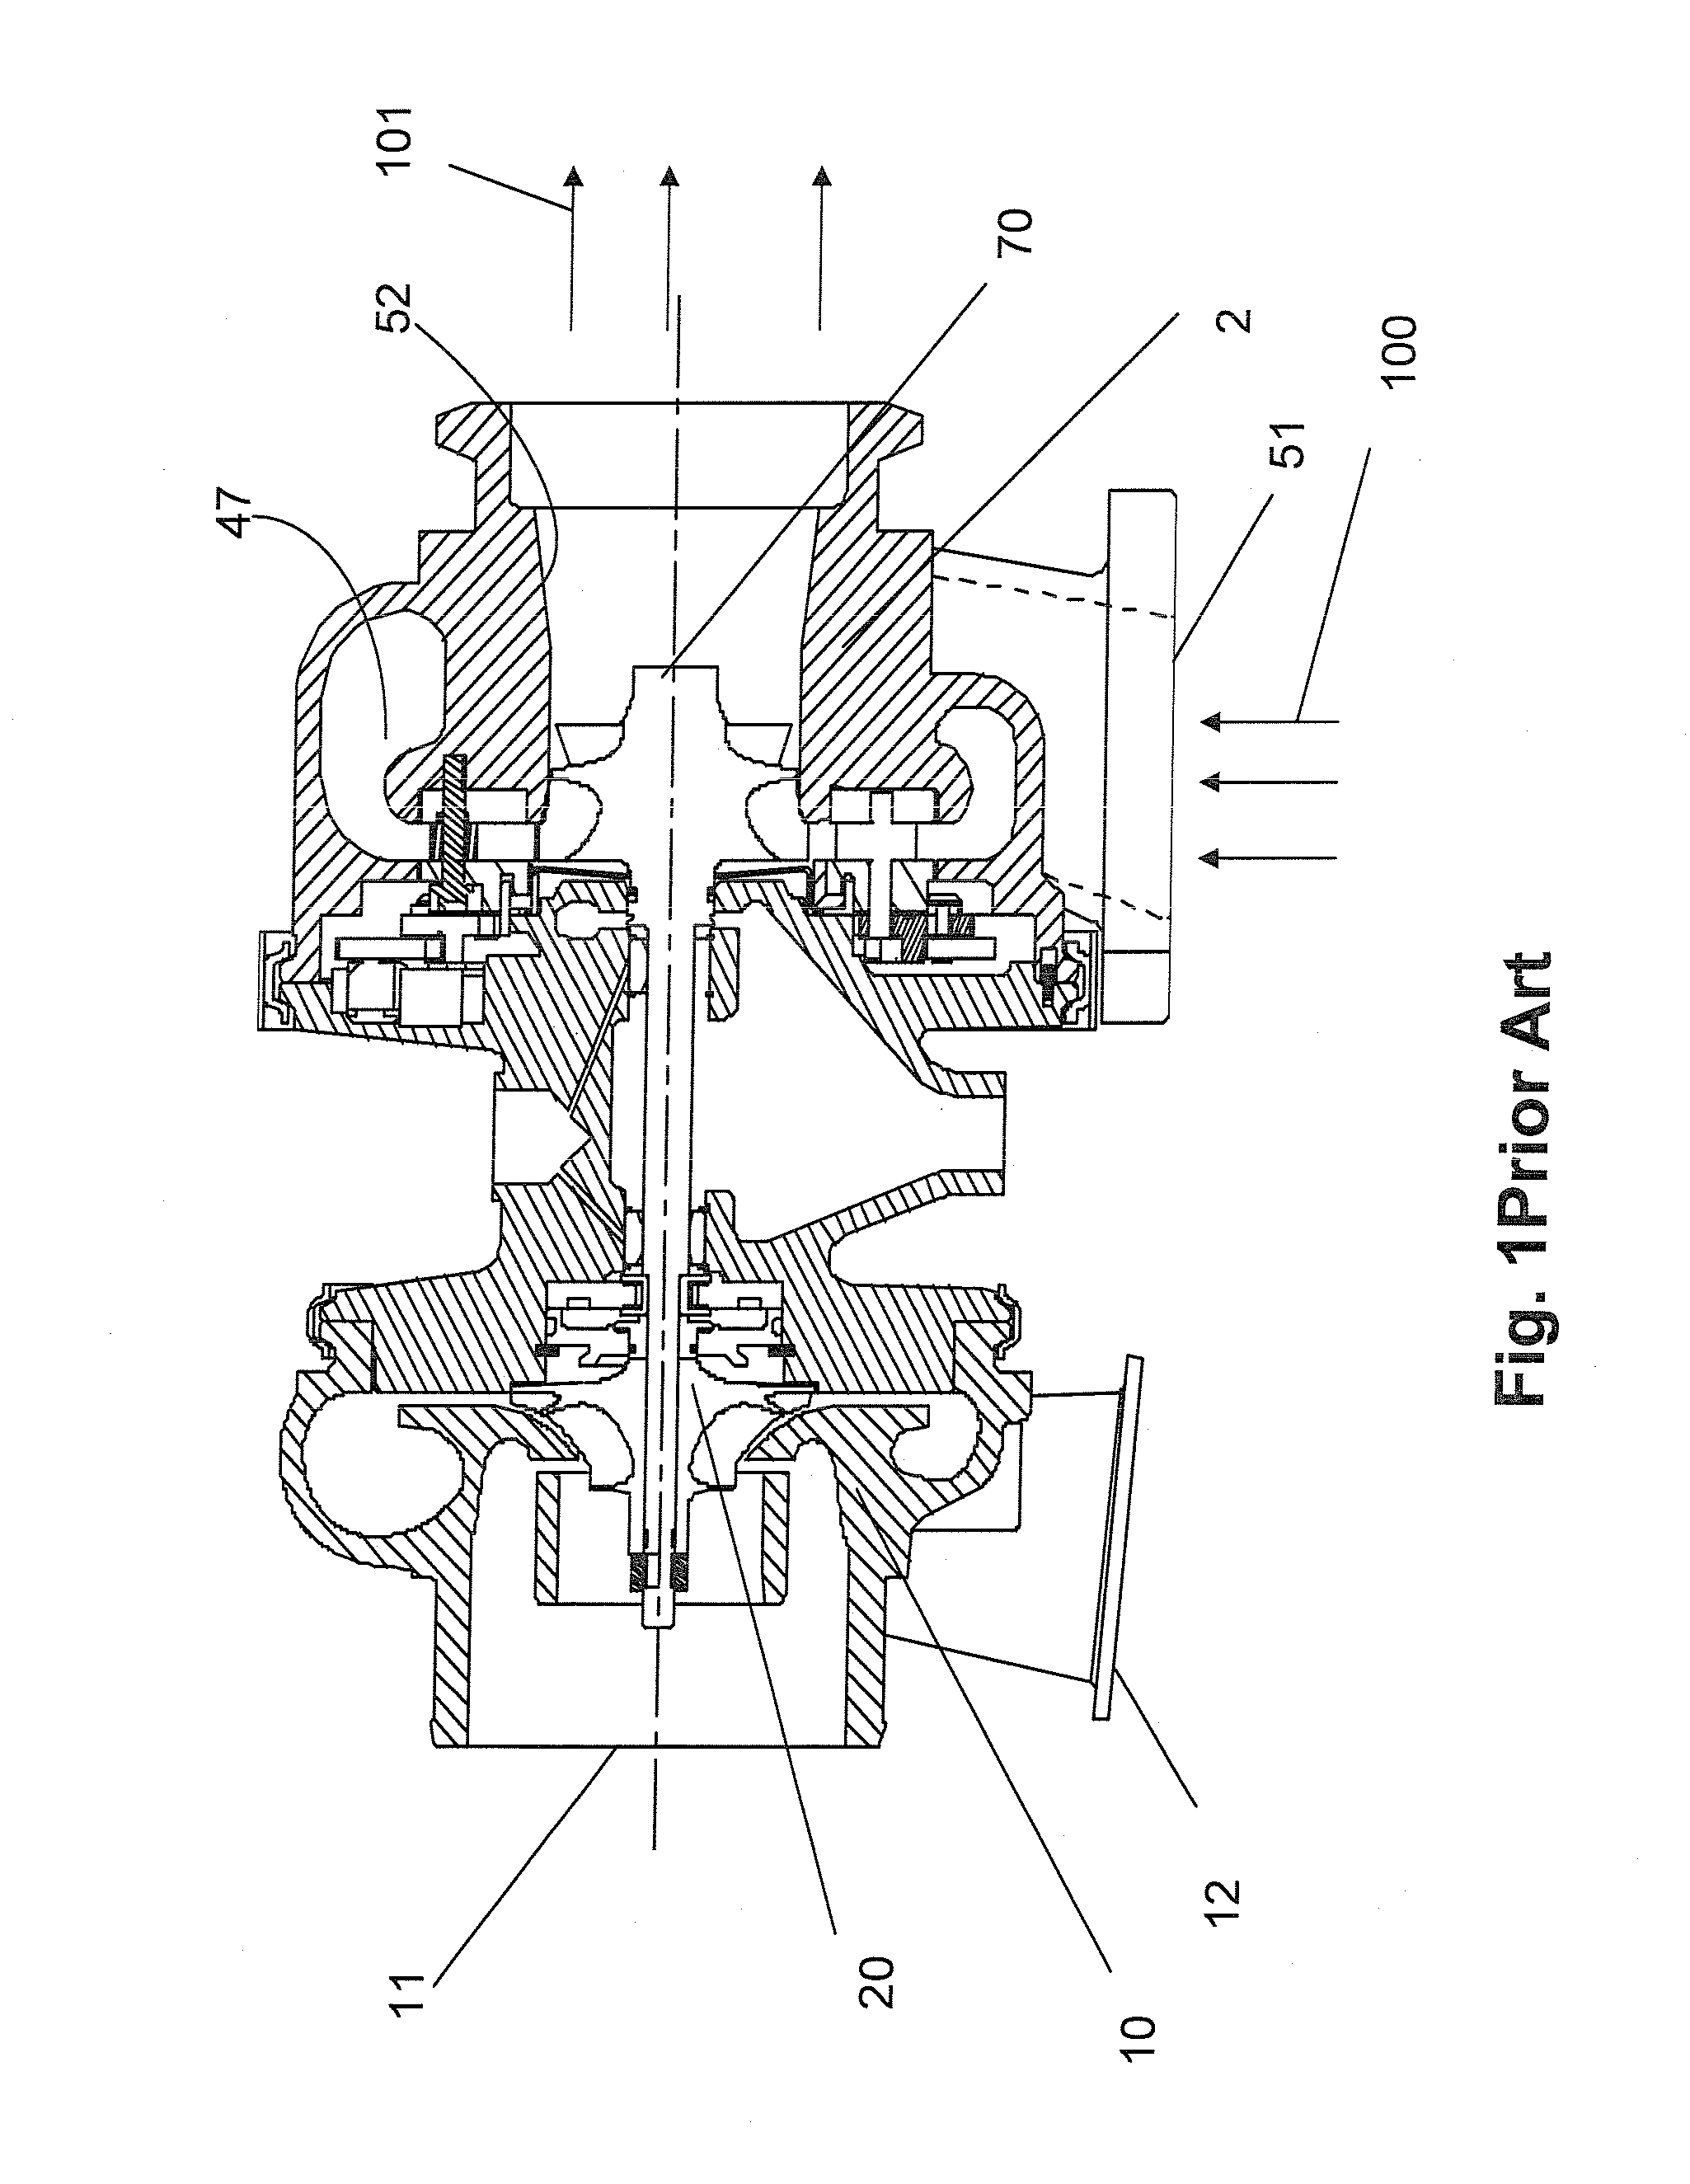 Simplified variable geometry turbocharger with sliding gate and multiple volutes